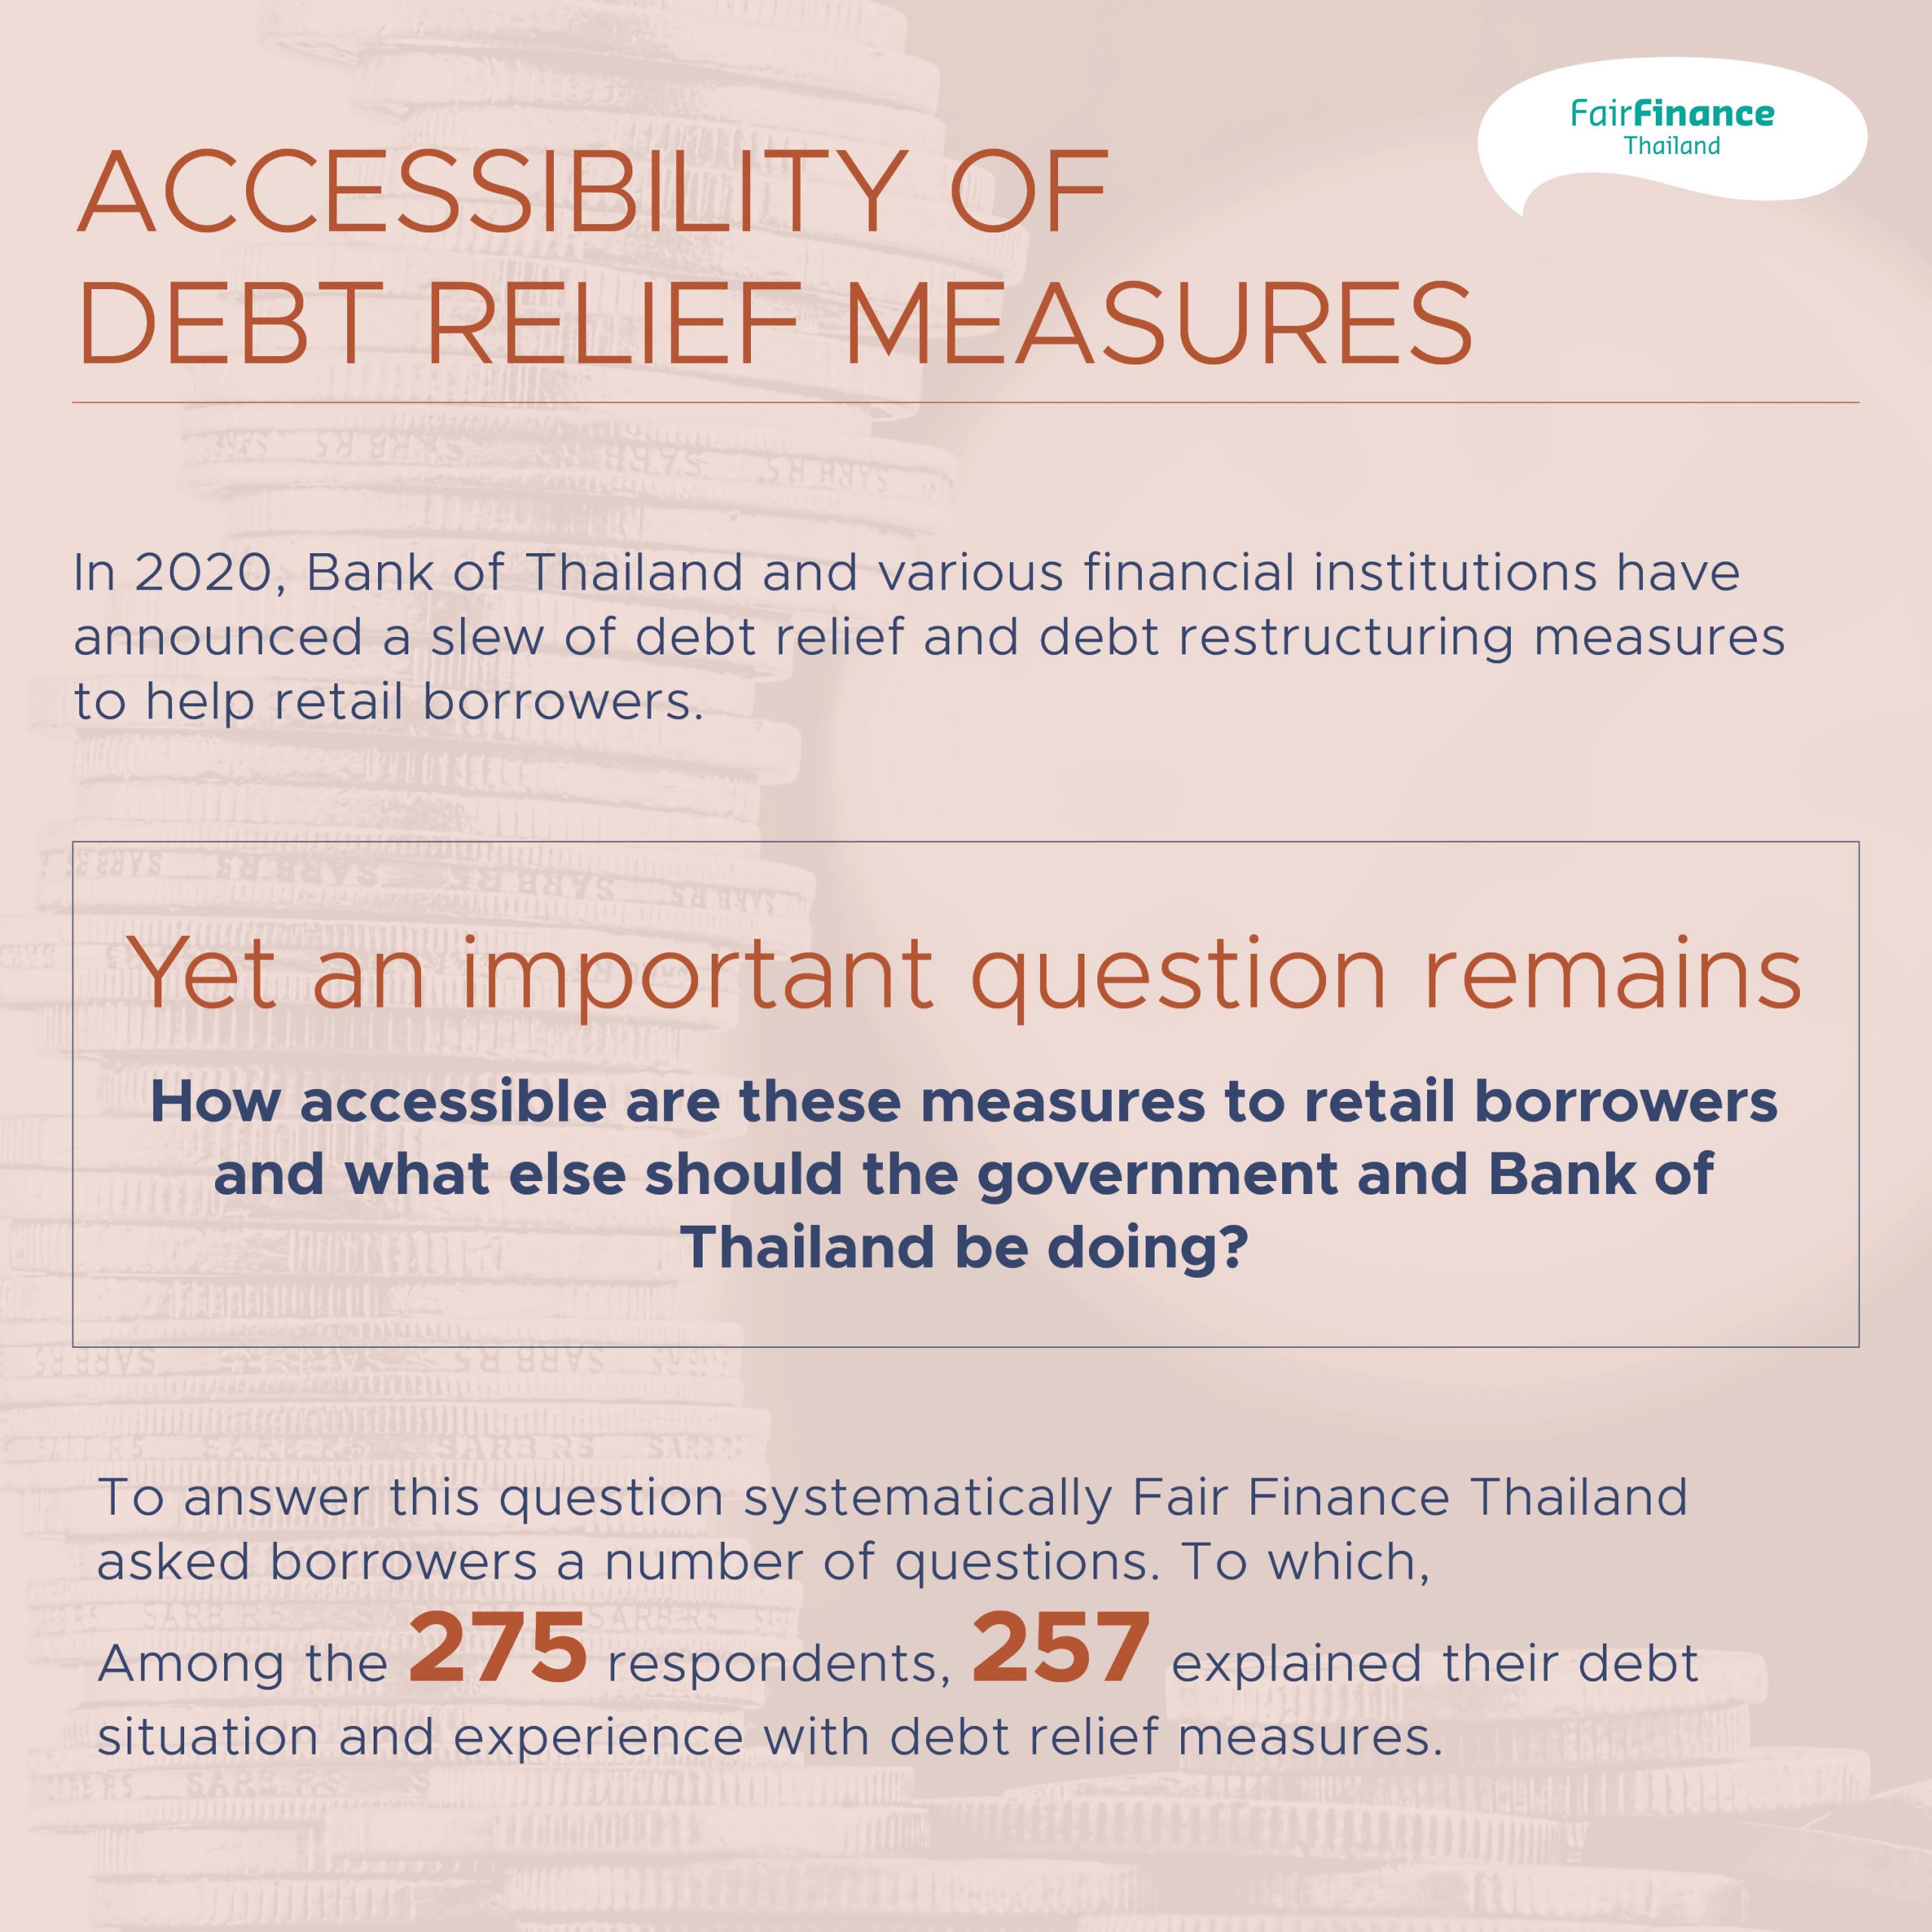 COVID-19 DEBT RELIEF MEASURES INSUFFICIENT, RETAIL BORROWERS SAID; FAIR FINANCE THAILAND ADVOCATES 6 MEASURES FOR SUSTAINABLE DEBT RELIEF